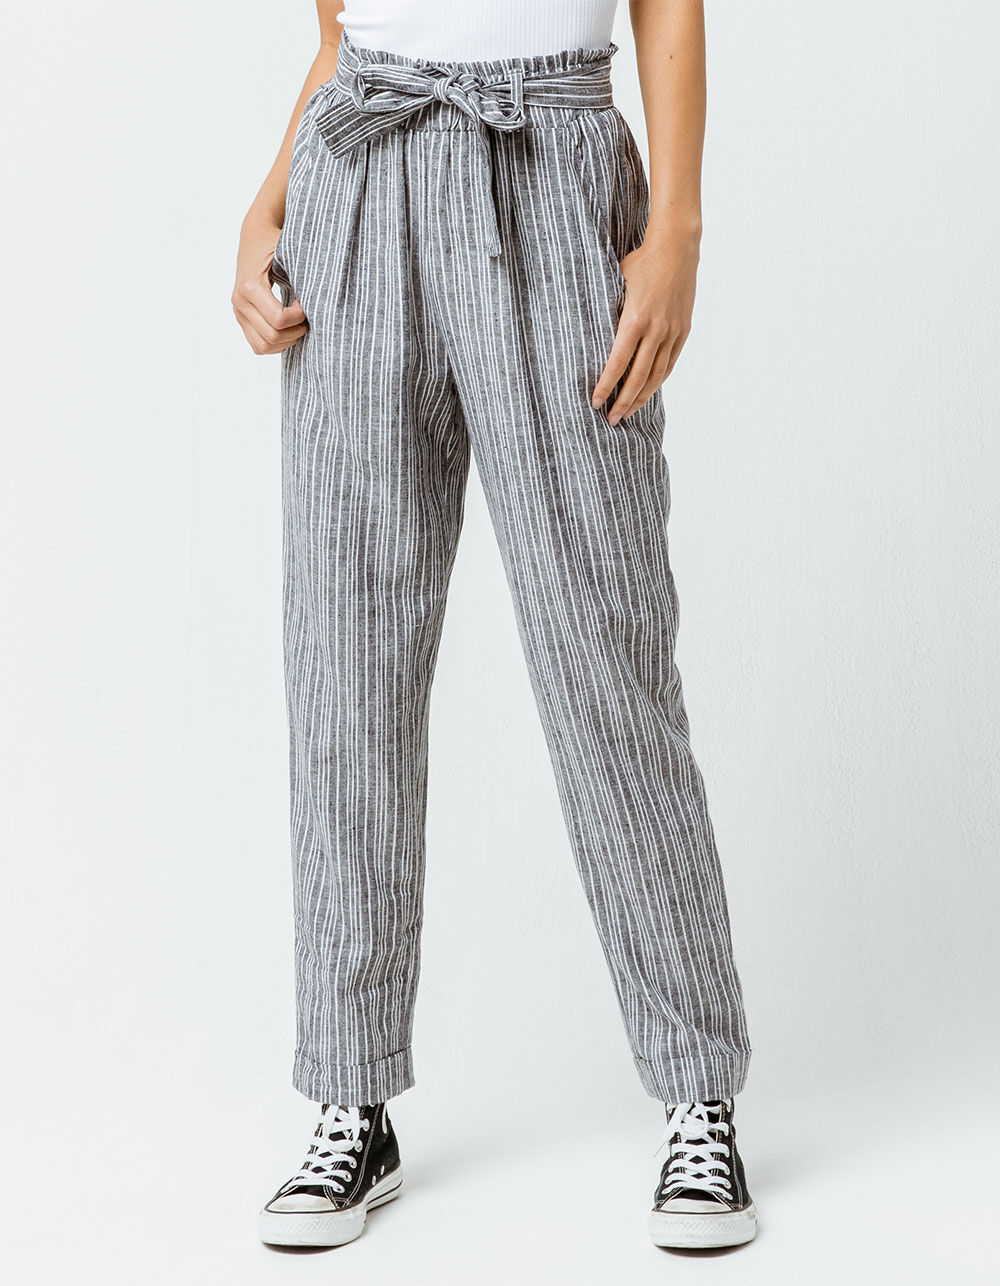 SKY AND SPARROW Stripe Paperbag Waist Womens Trouser Pants image number 0